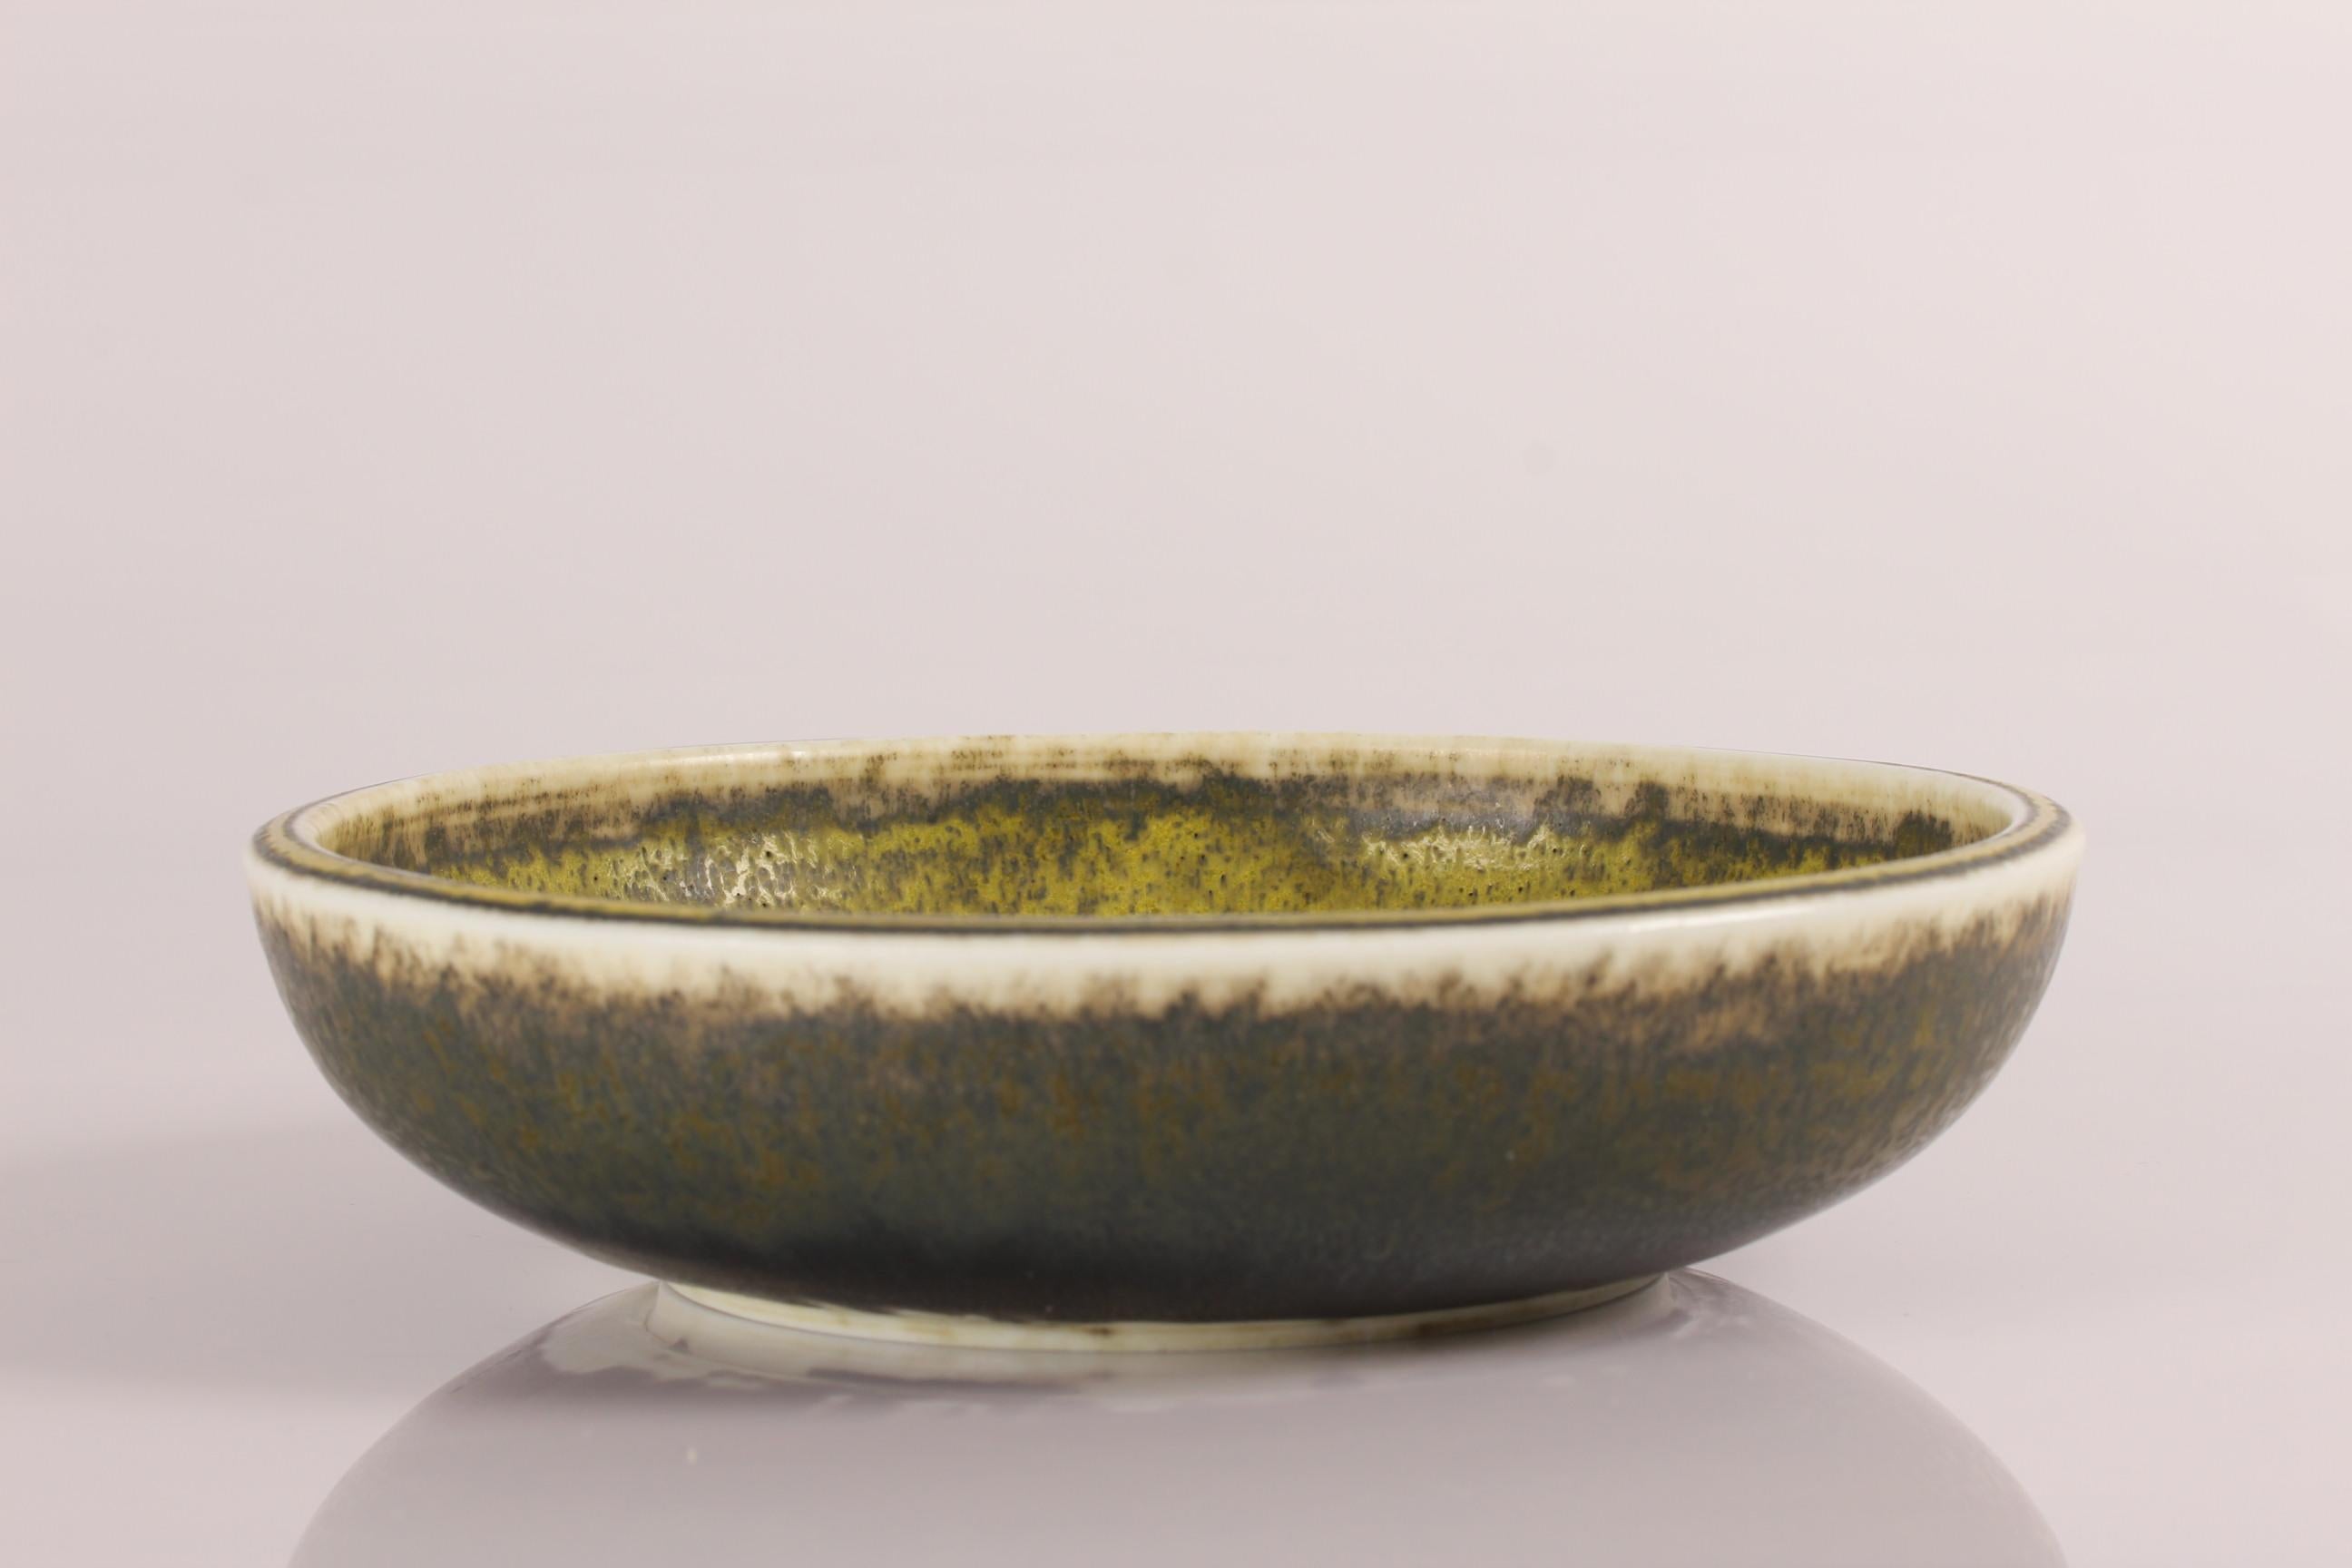 Minor round stoneware bowl model no. 5128 designed by Danish ceramist Knud Halier and manufactured by Royal Copenhagen, early 20th century

The bowl is decorated with Solfatara glaze and the inside of the bowl has got a spiral pattern.
It's